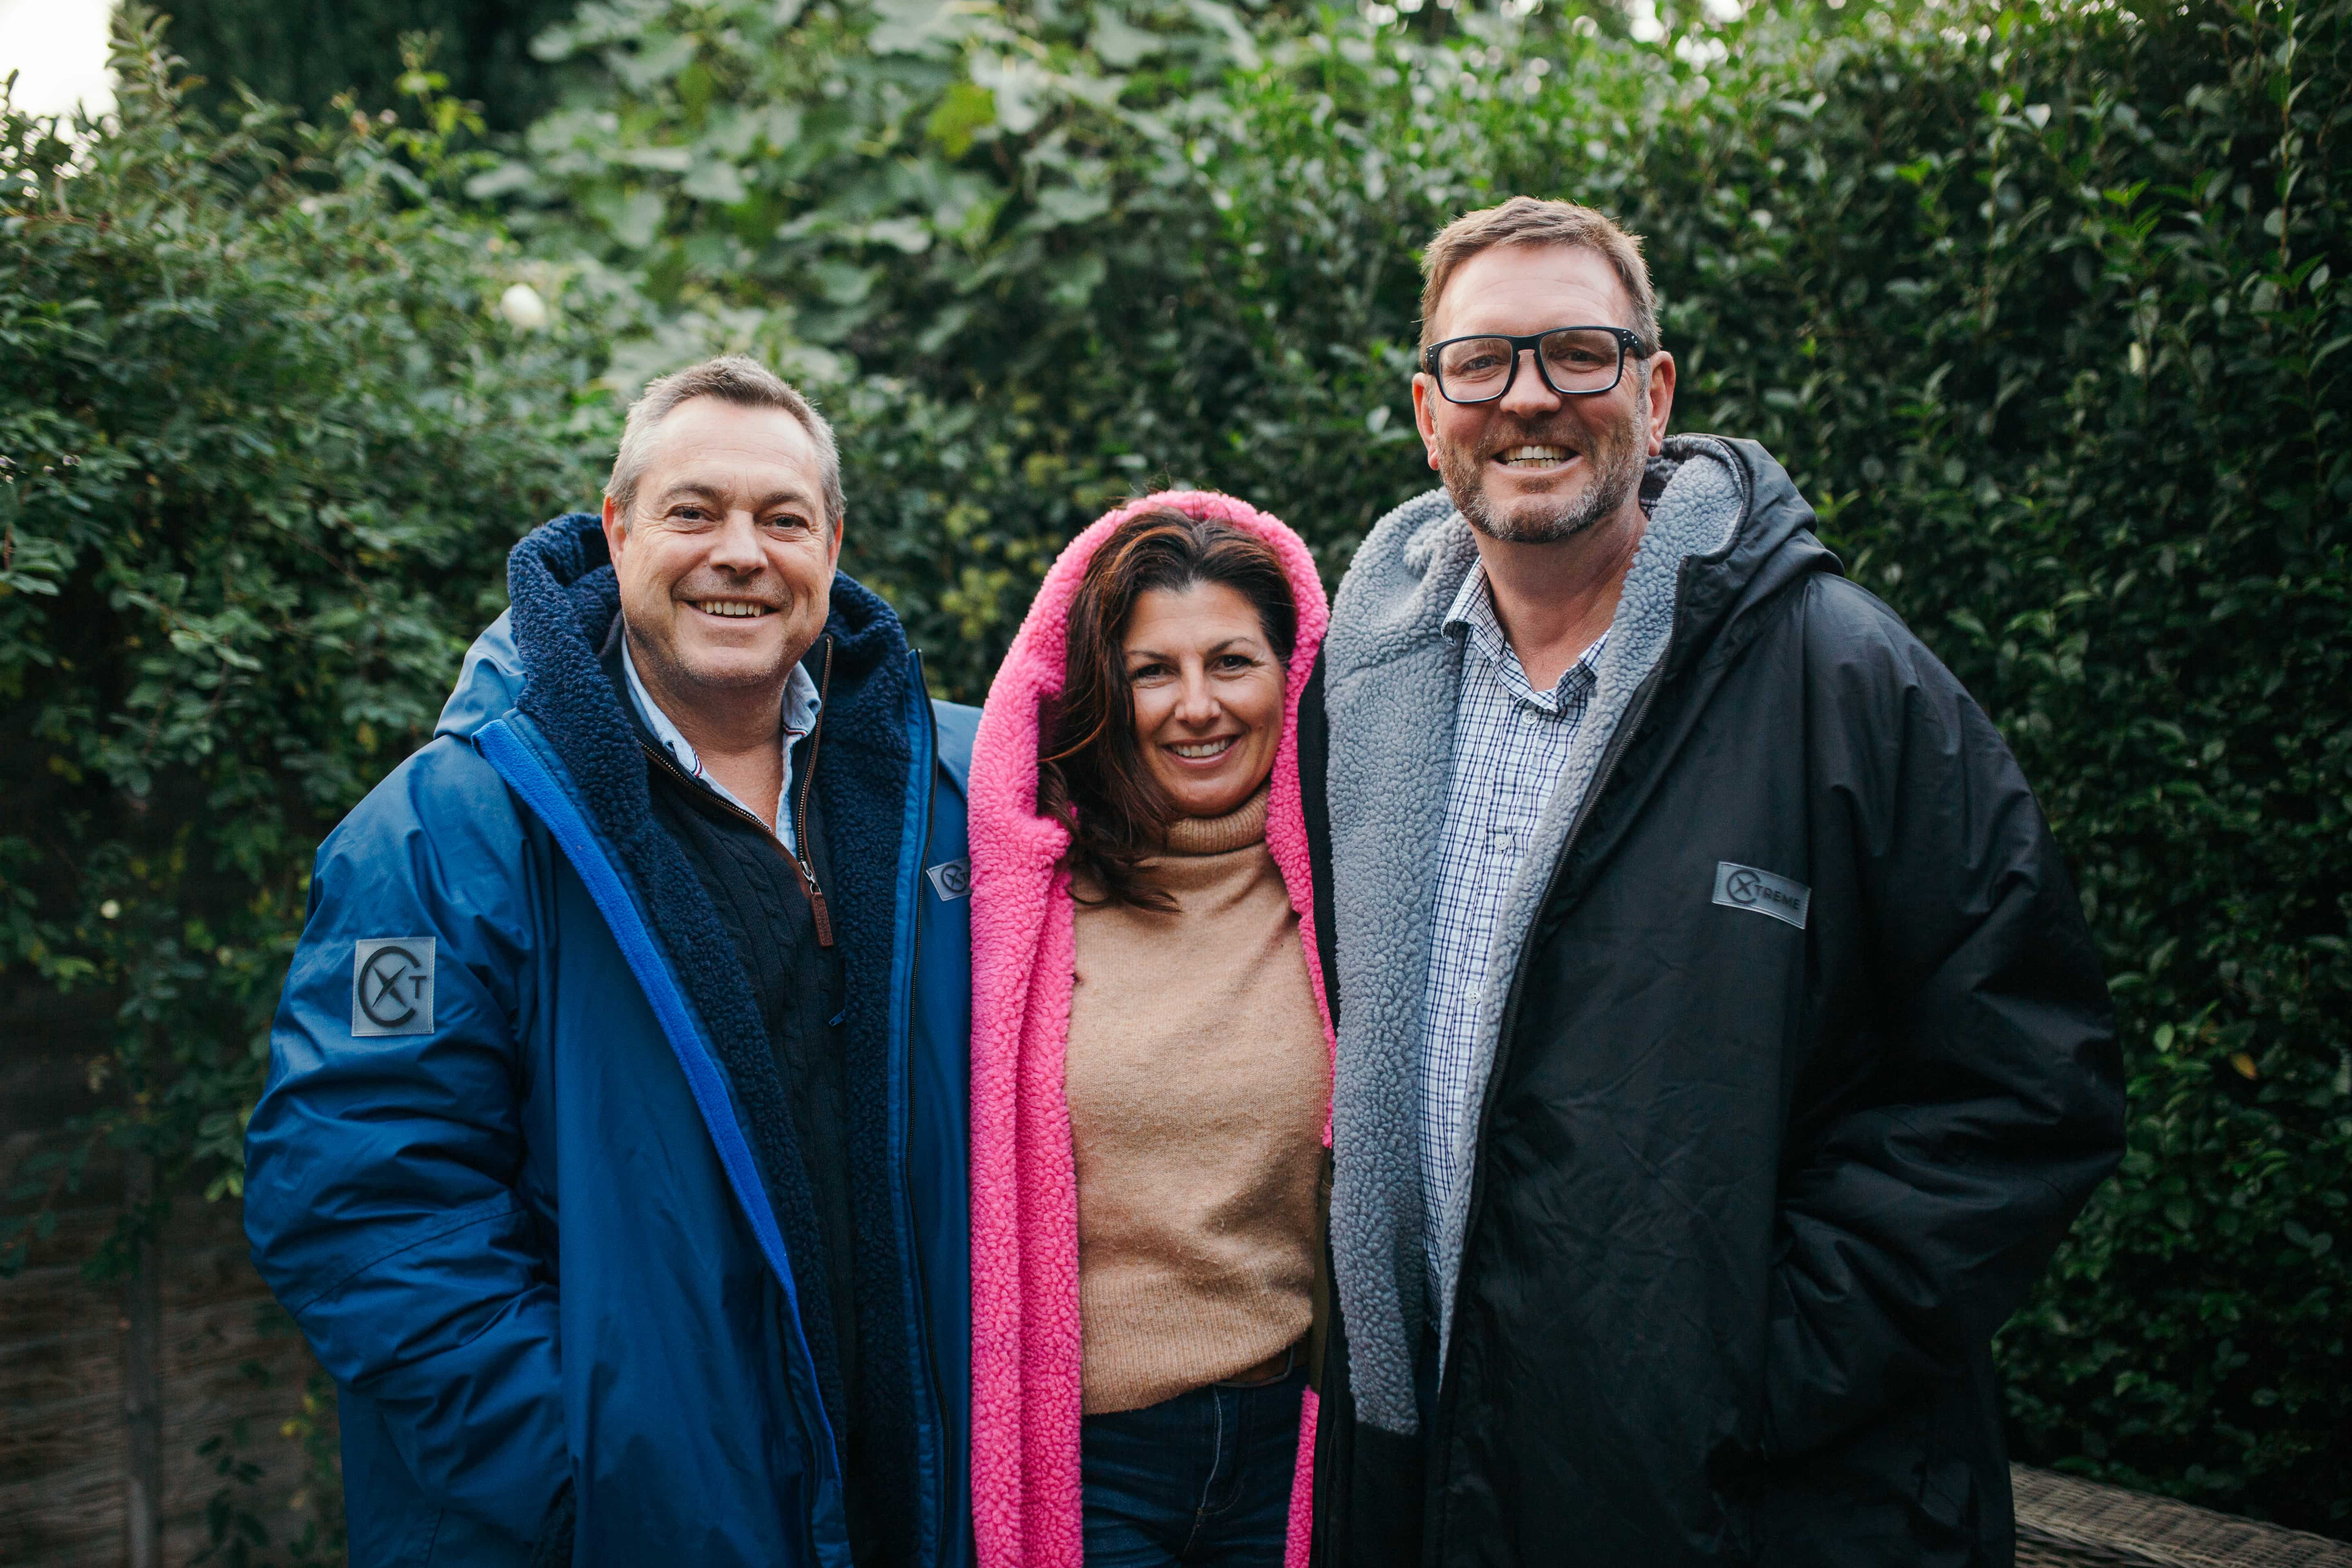 Steve, Lisa and Guy, Founders of Xtreme Robes